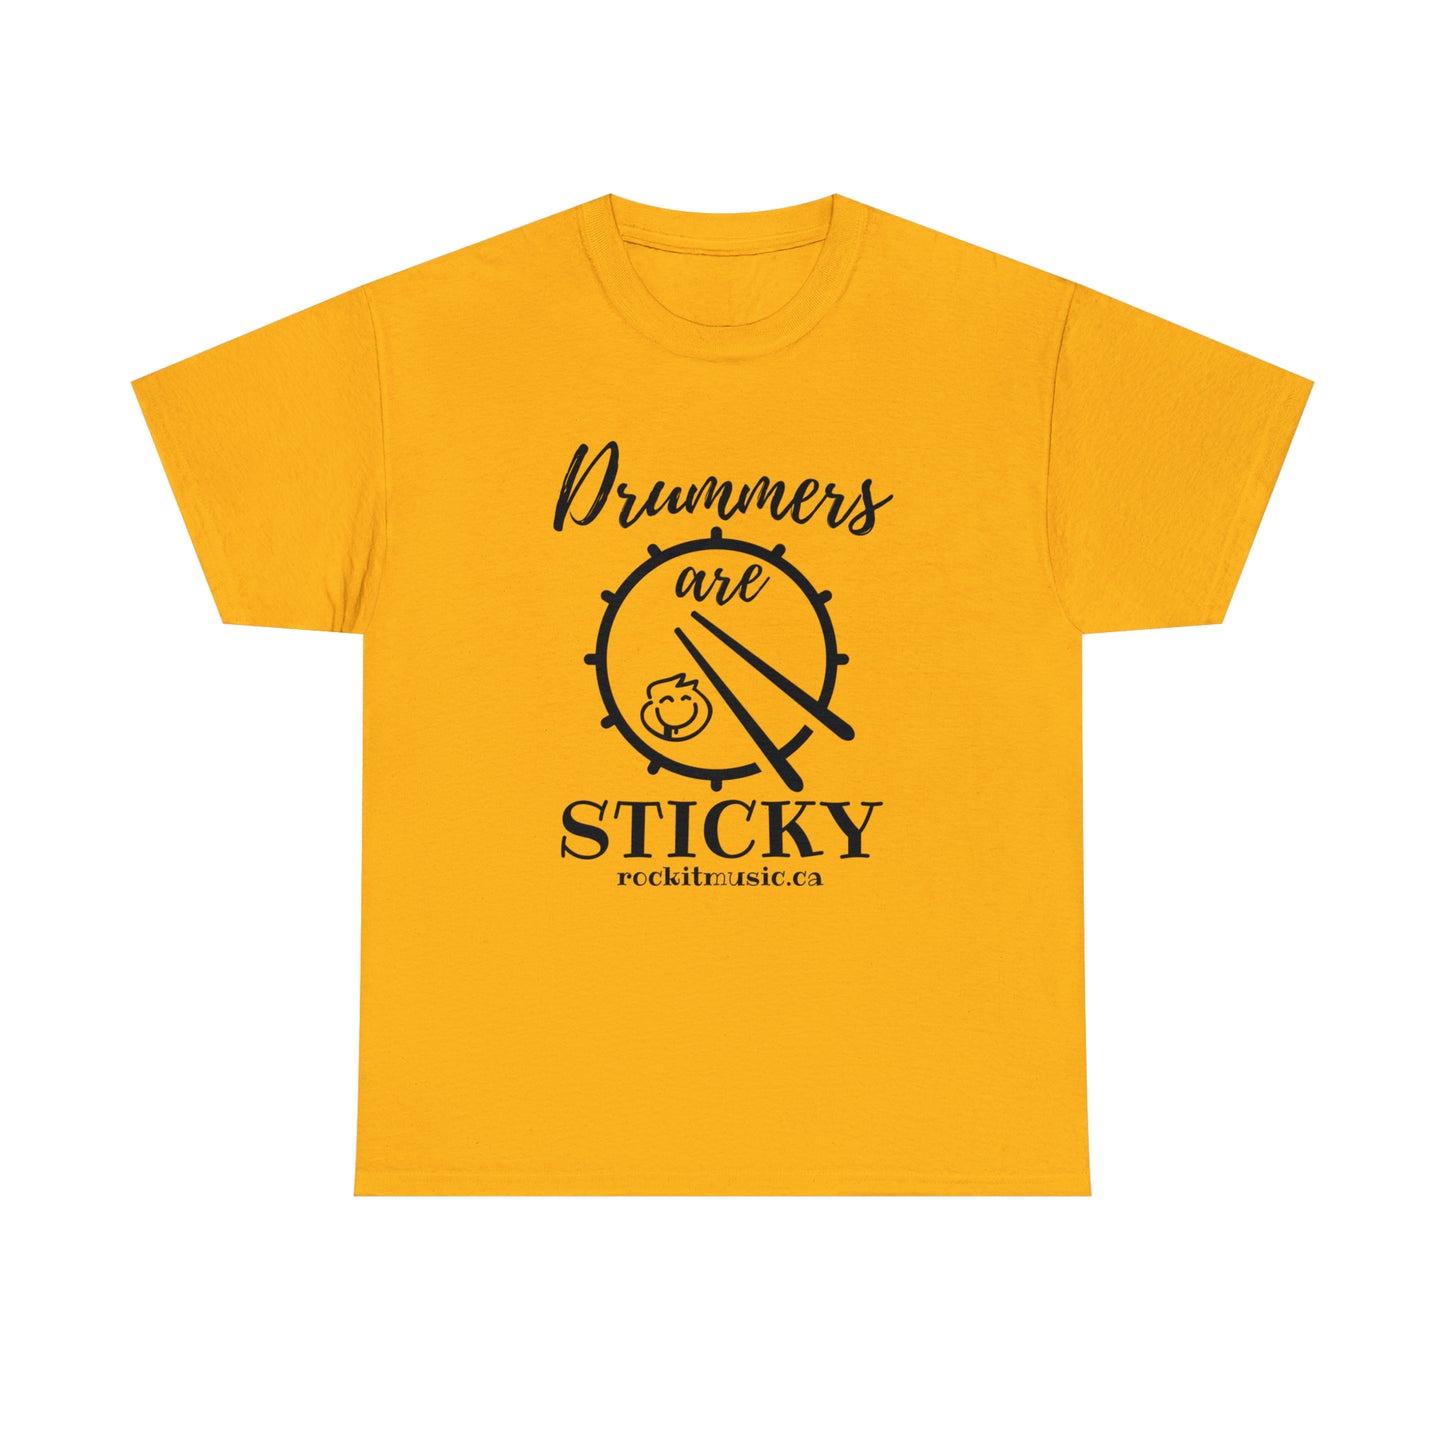 Rockit T-Shirt - Drummers are Sticky